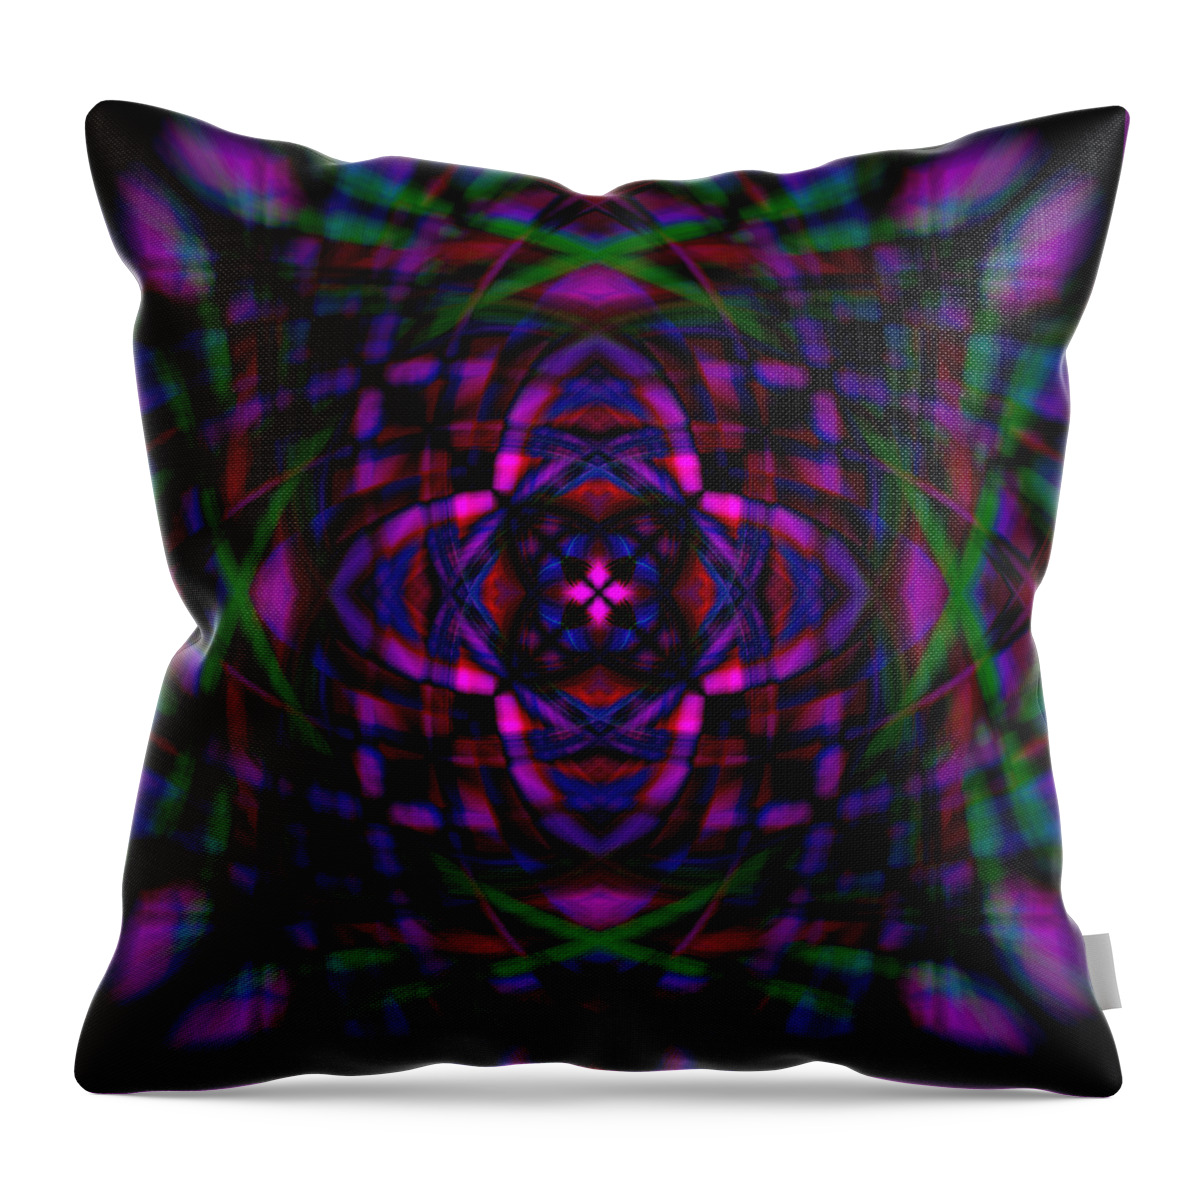 Purple Throw Pillow featuring the photograph Star Flower by Cherie Duran